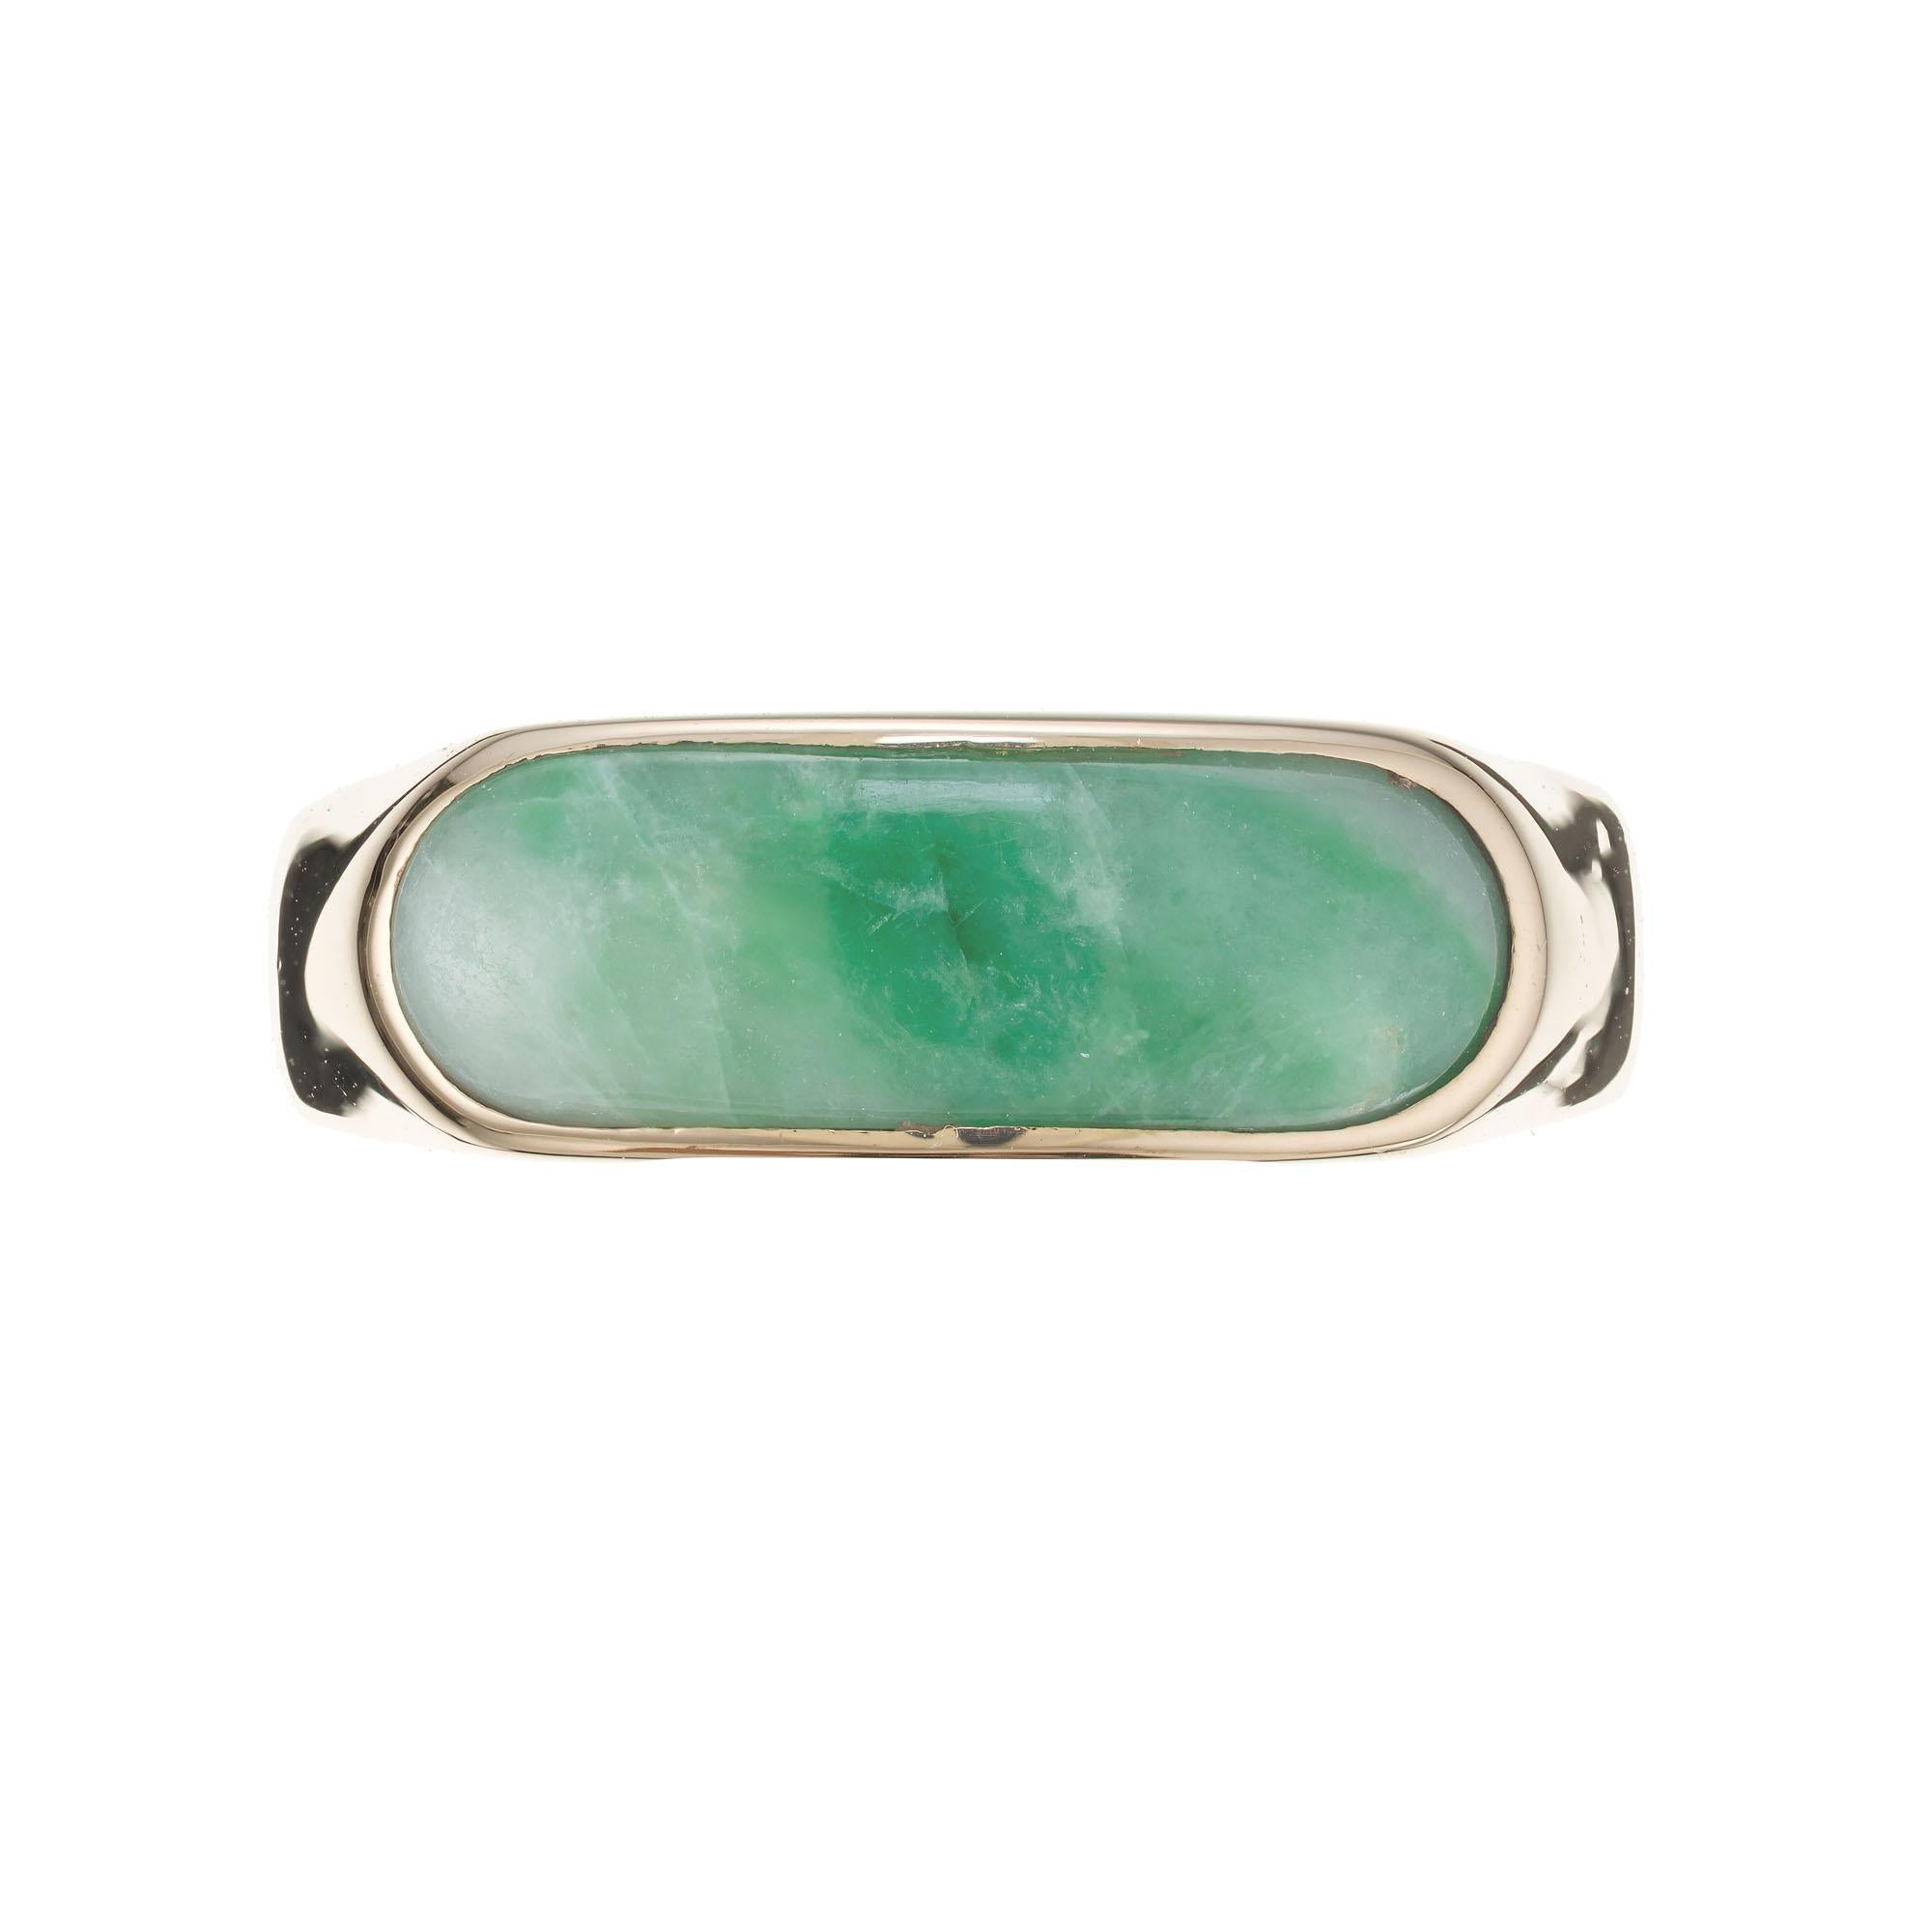 1960's Elongated jadeite jade saddle 18k yellow gold ring. GIA certified untreated bright green Jade. 

18k yellow gold
One mottled green natural untreated Jadeite Jade 14.9 x 5mm, semi translucent, natural, no treatment, GIA certificate